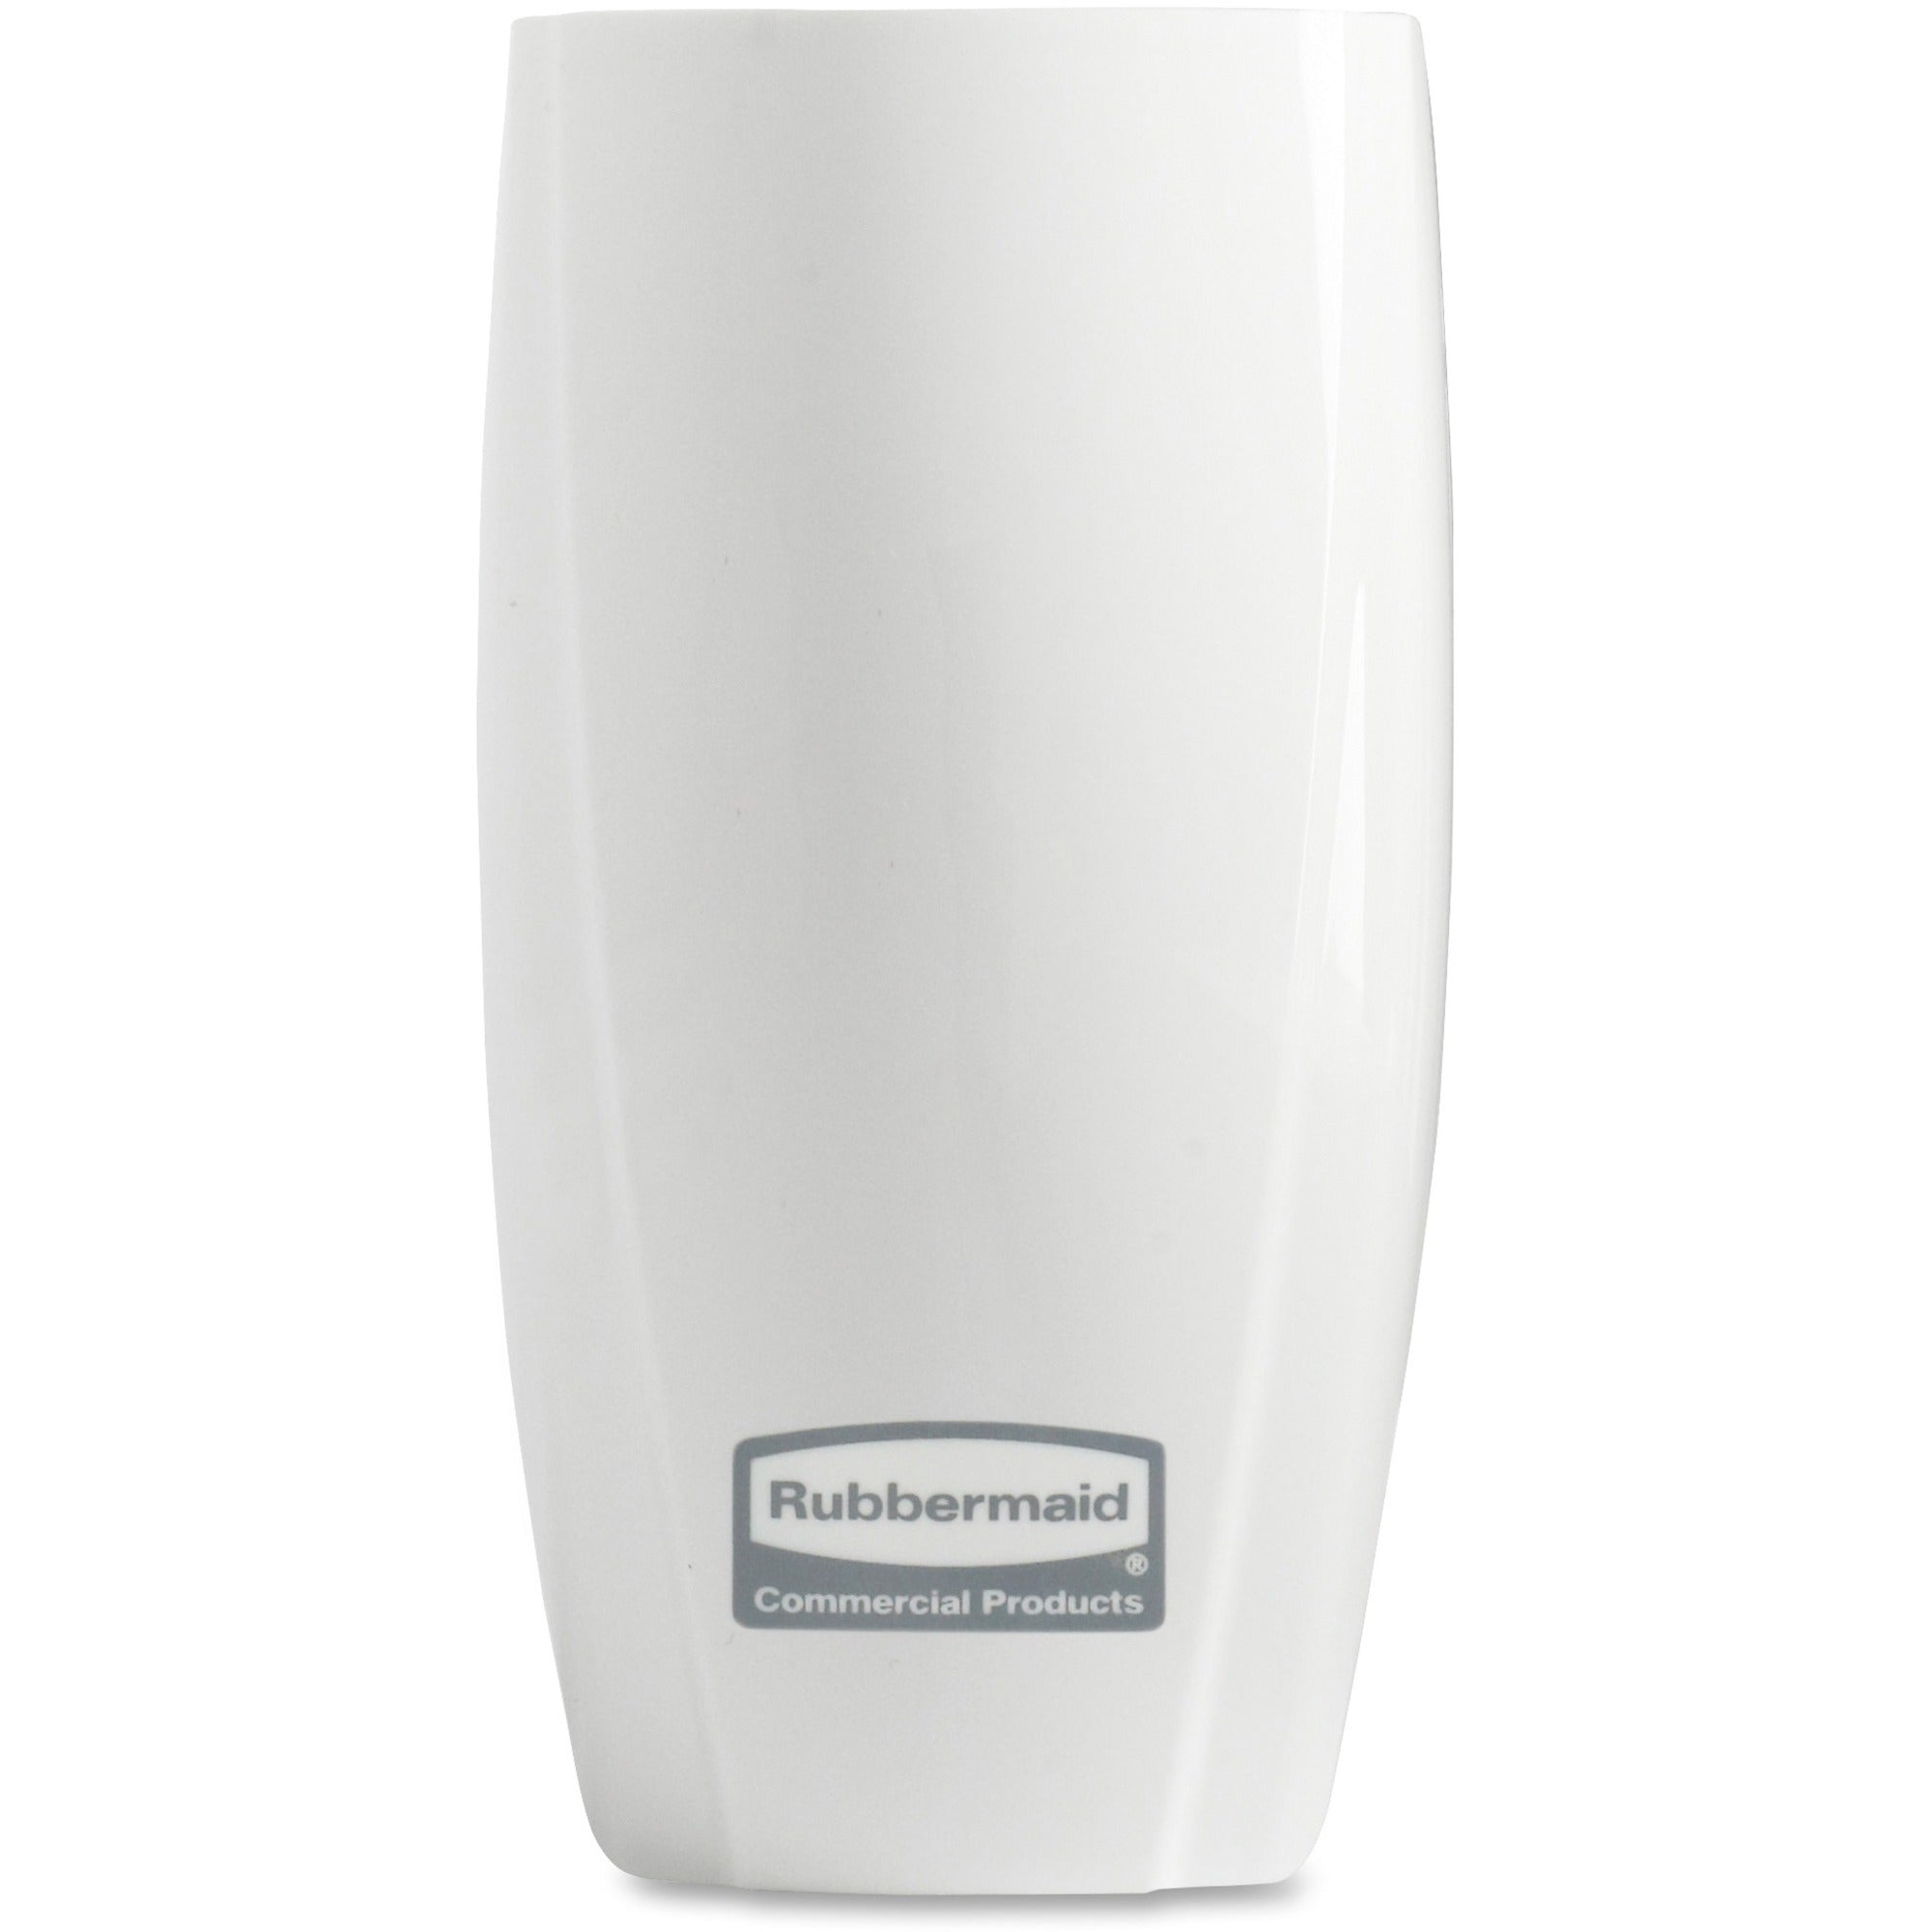 Rubbermaid Commercial TCell Air Fragrance Dispenser - 90 Day Refill Life - 6000 ft Coverage - 12 / Carton - White